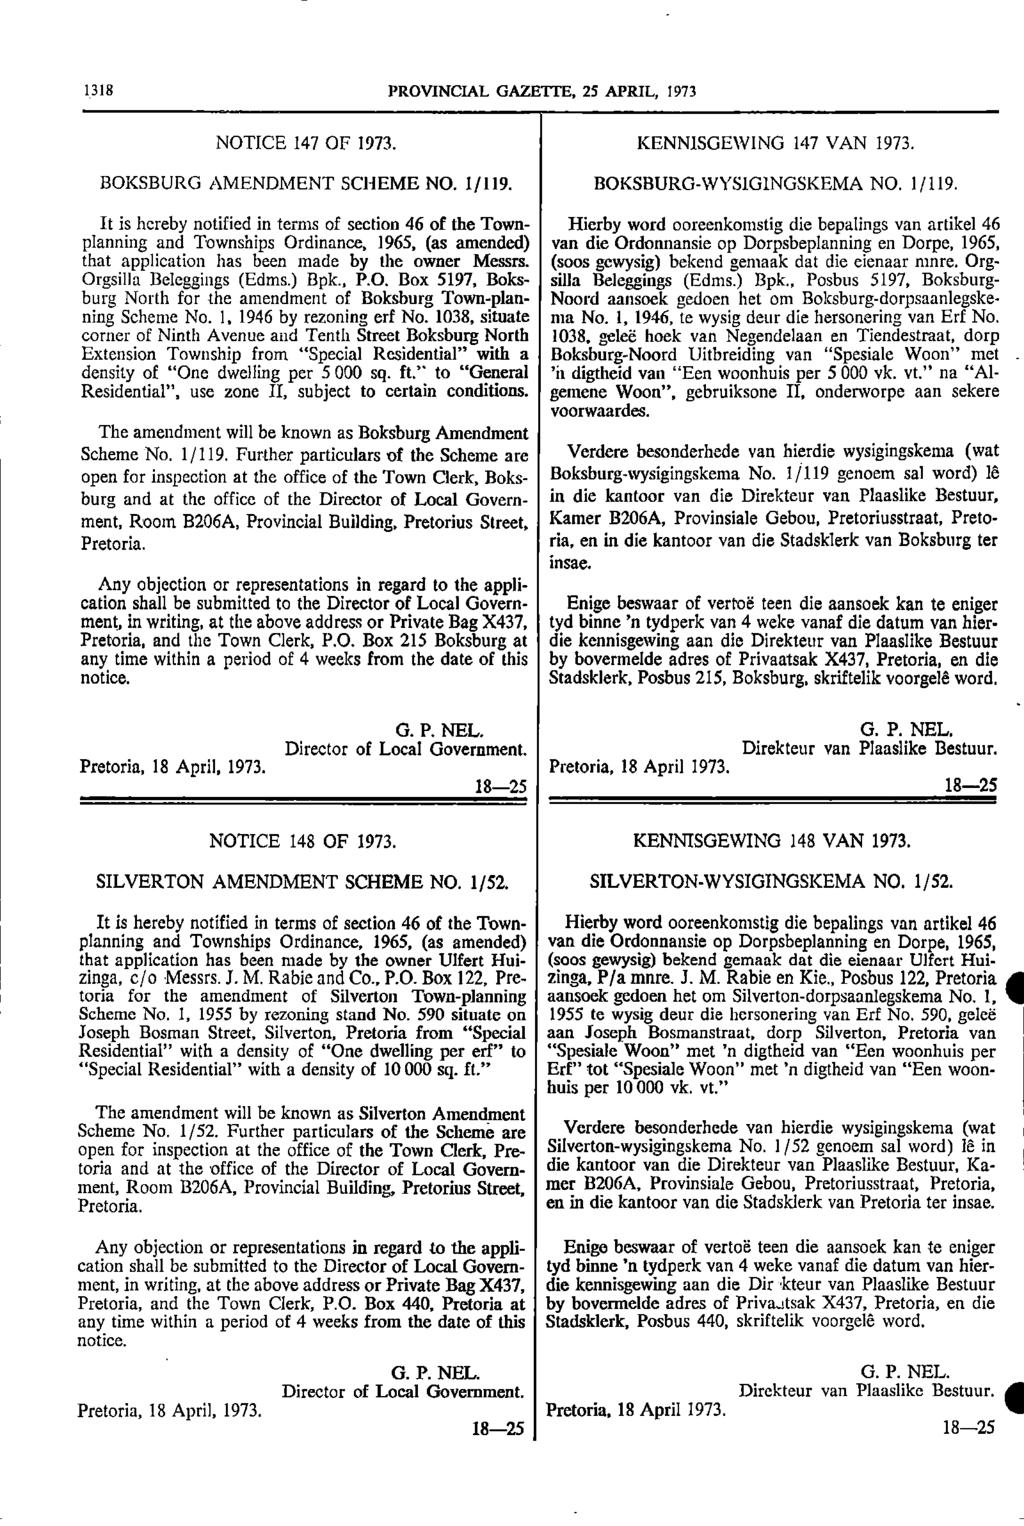 1318 PROVINCIAL GAZETTE 25 APRIL 1973 NOTICE 147 OF 1973 KENNISGEWING 147 VAN 1973 BOKSBURG AMENDMENT SCHEME NO 1/119 BOKSBURG WYSIG1NGSKEMA NO 1/119 It is hereby notified in terms of section 46 of